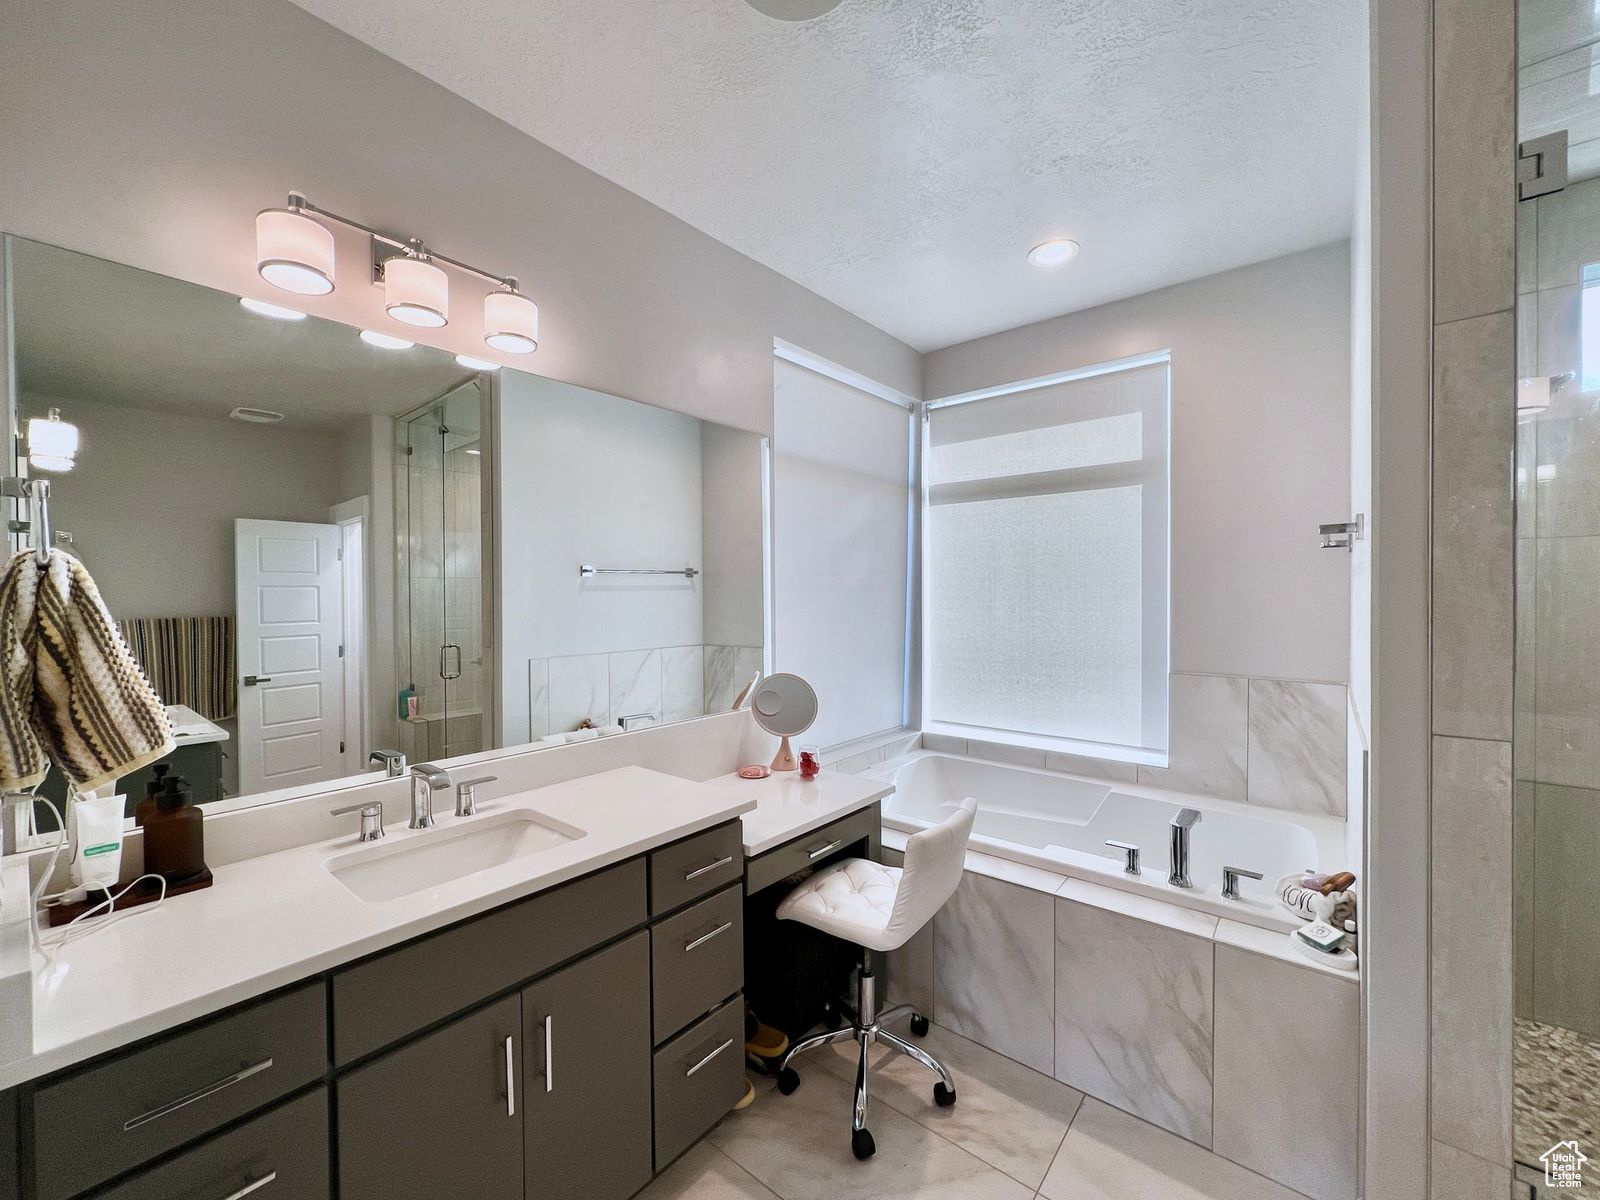 Bathroom featuring vanity, shower with separate bathtub, tile floors, and a textured ceiling